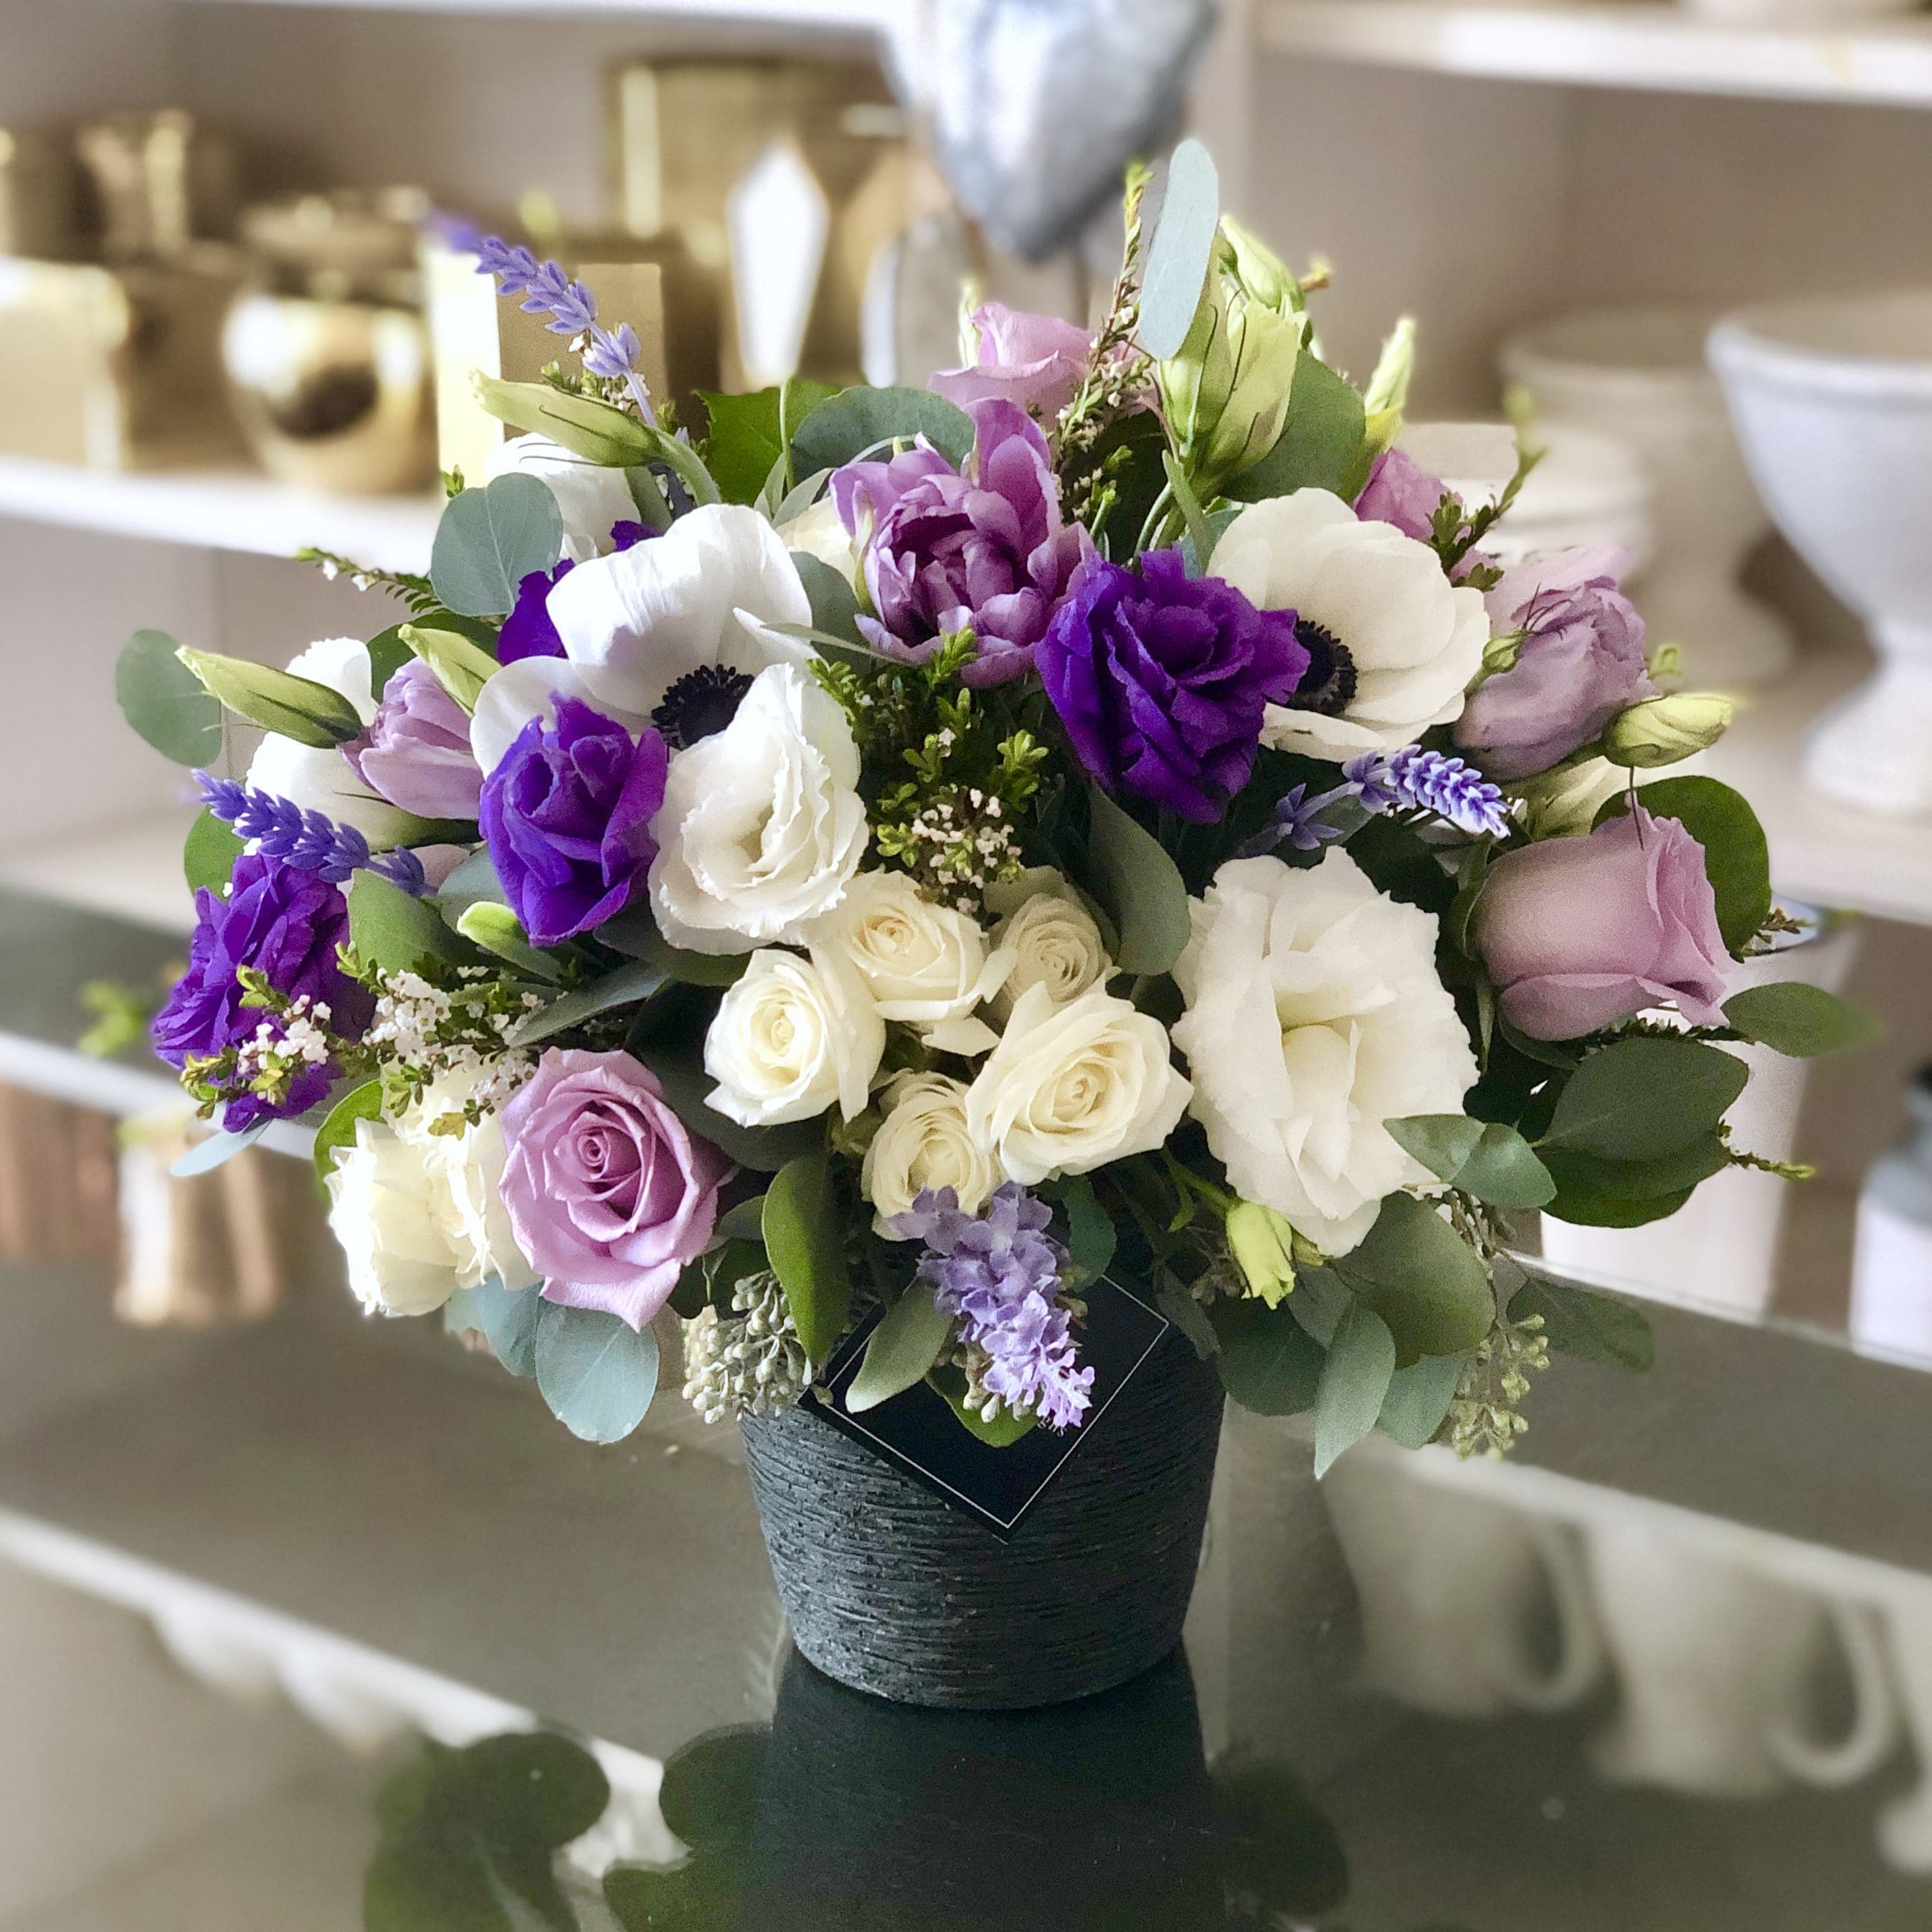 Sassy - A lively, bold, and full of spirit arrangement is best described our Sassy Bouquet. A textured clay pot filled with Purple and White Lisianthus, White Spray Roses, White Roses, Purple Stock, Lavender Roses, Seeded Eucalyptus, White Anemones.   (Please note when Anemones are not in season we will use other premium florals as a substitution)